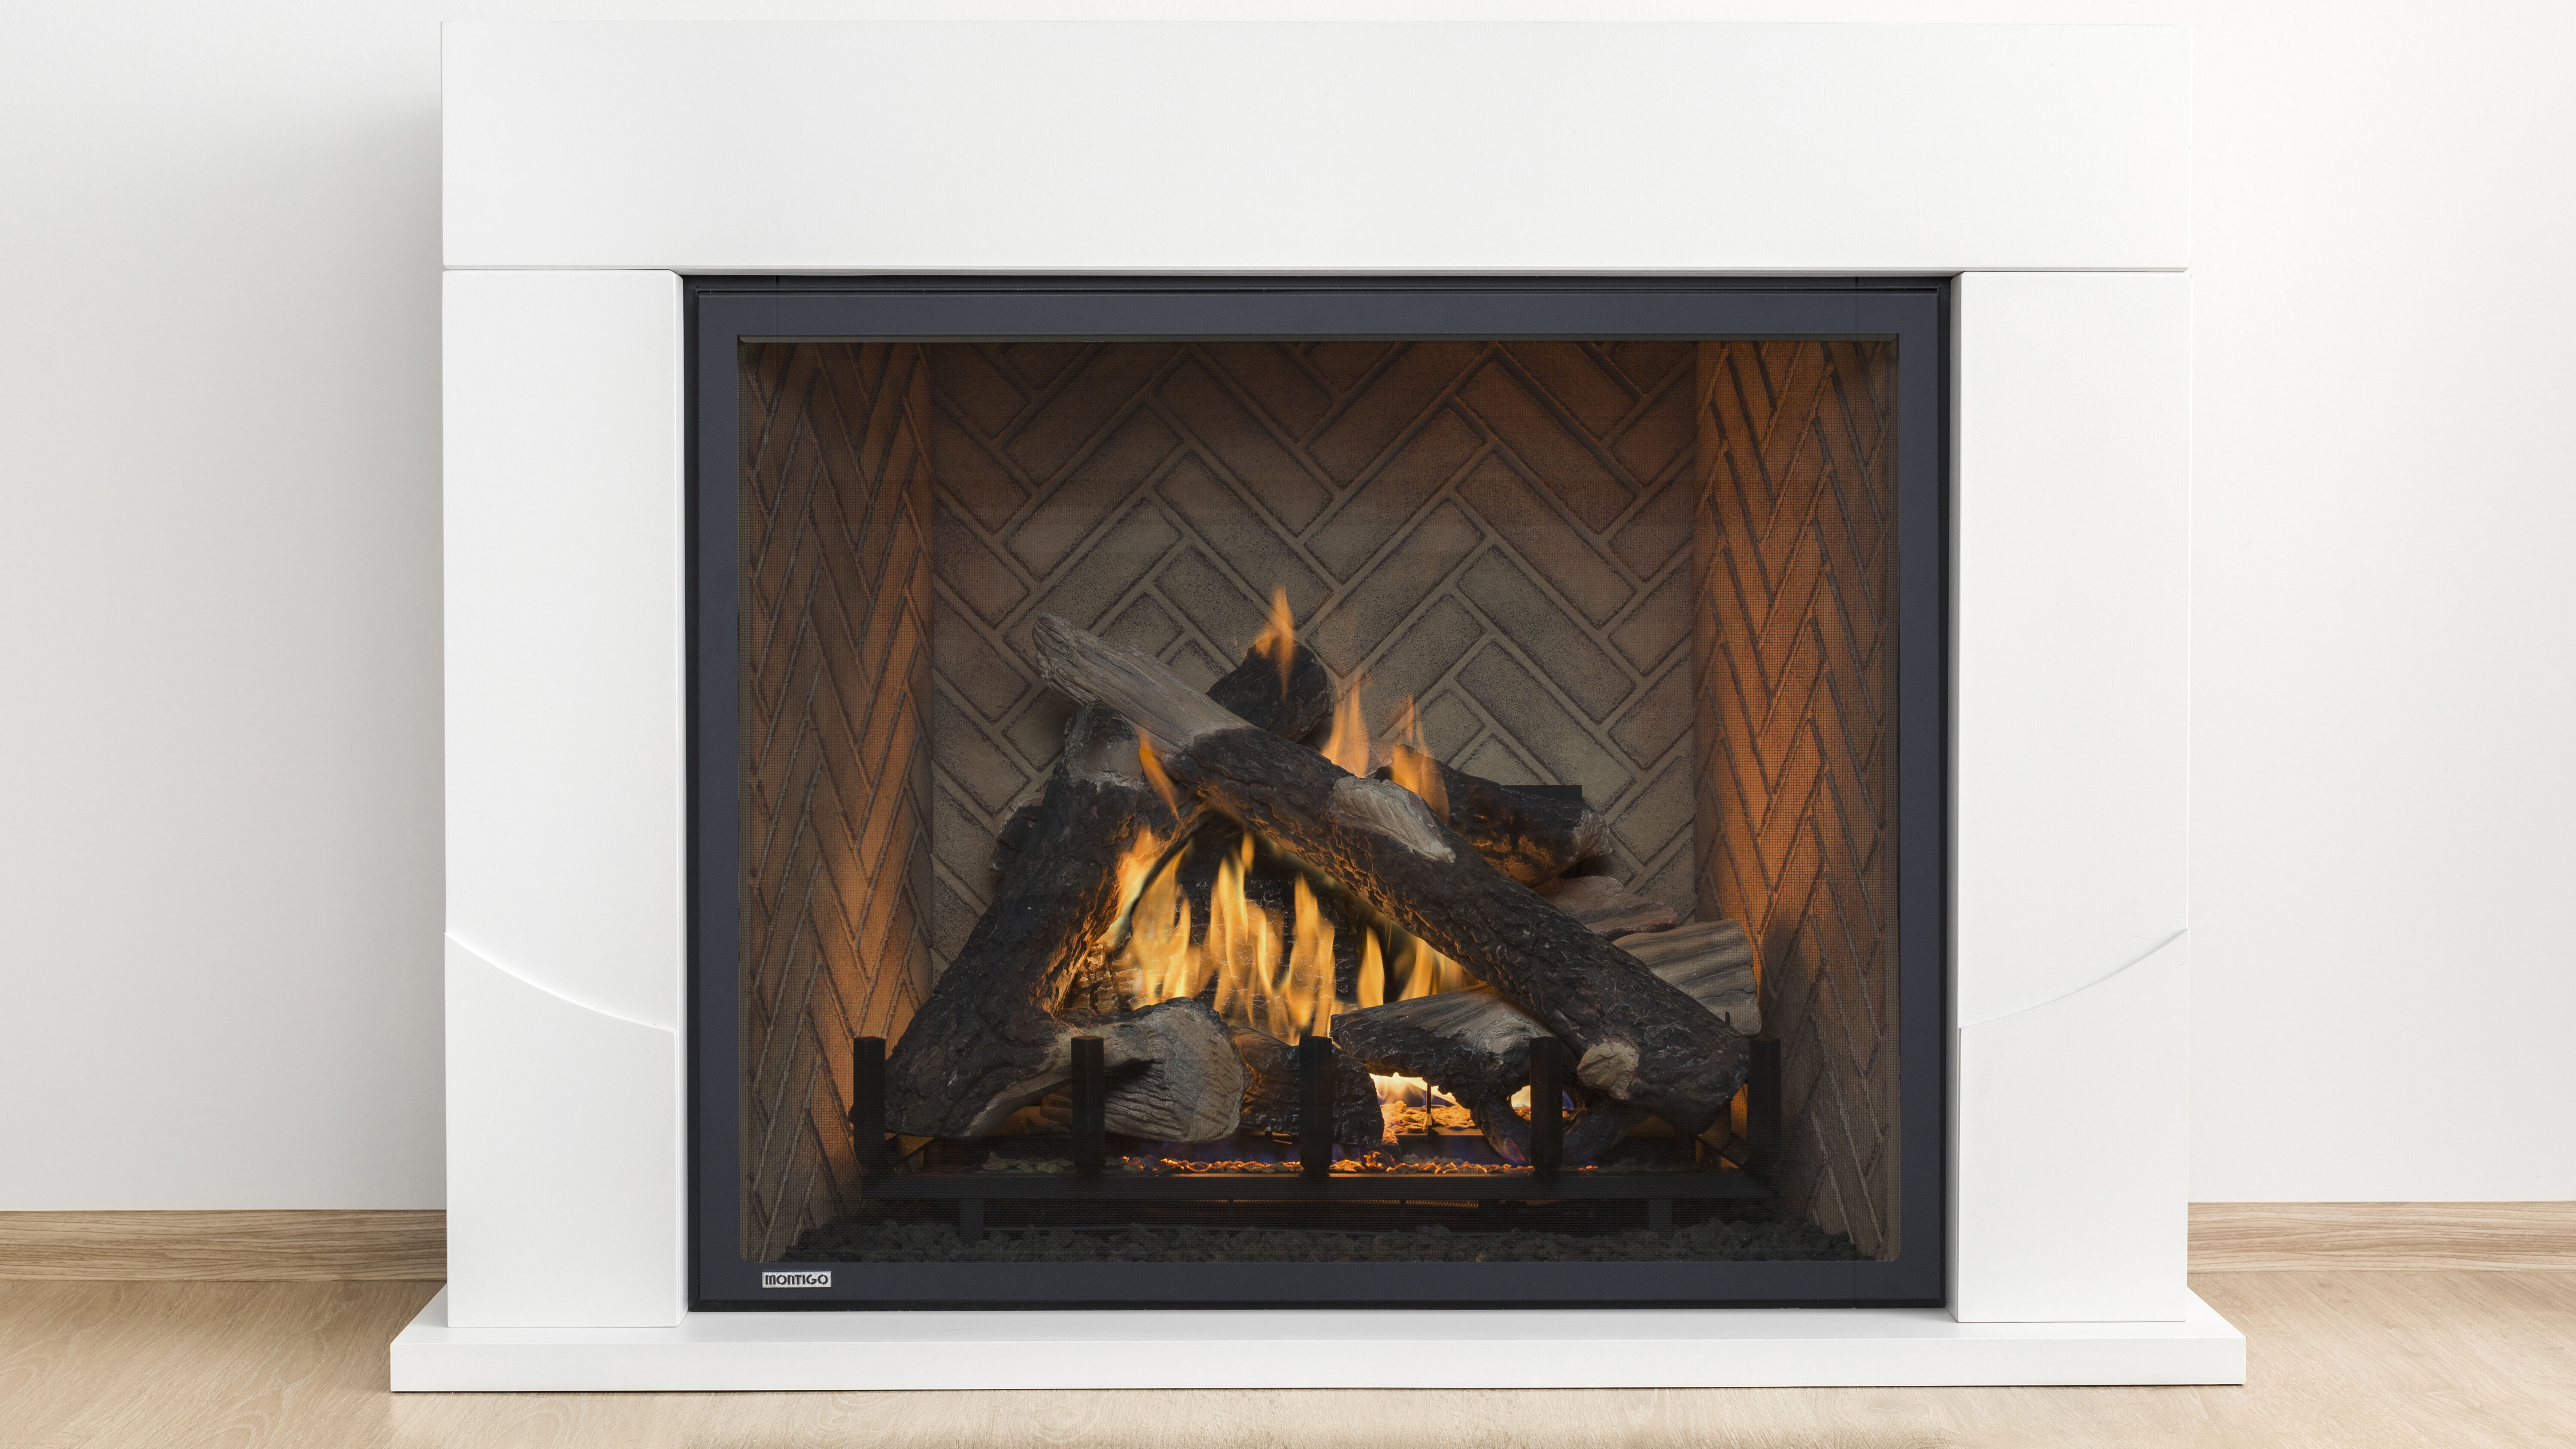 How to Clean Fireplace Glass, Easily Clean Your Wood & Gas Fireplaces